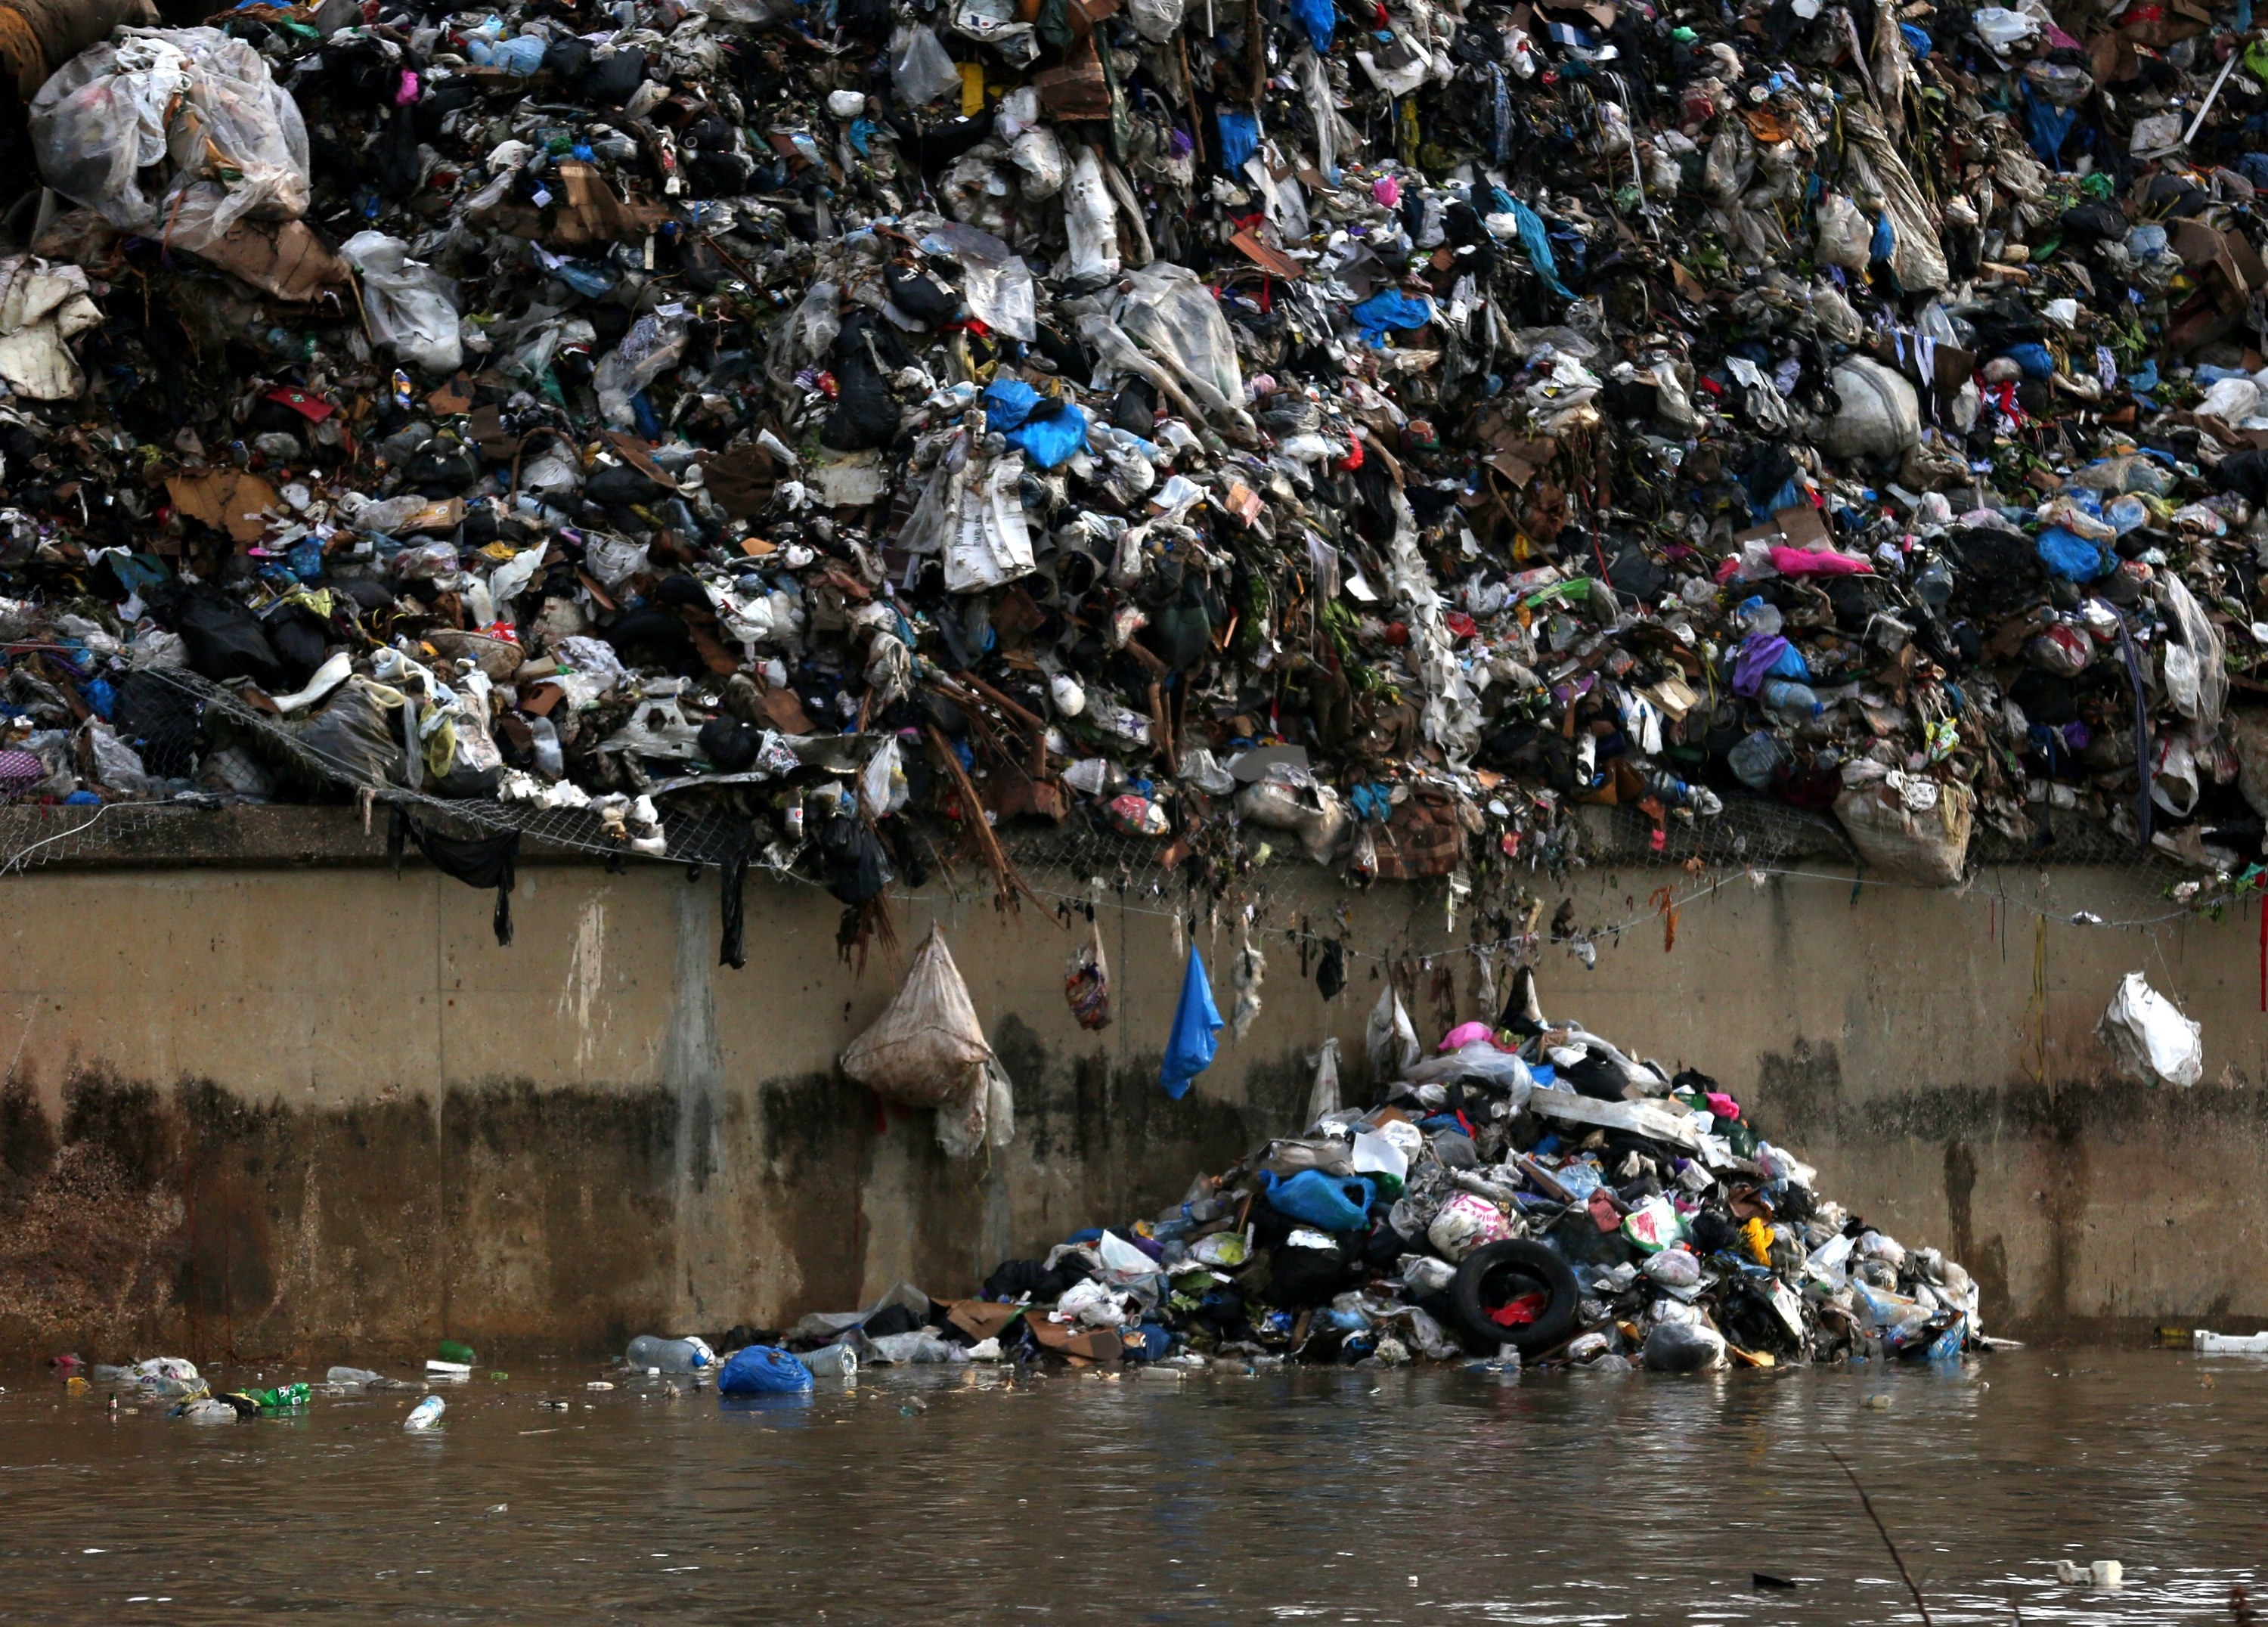 Trash spills into water in Lebanon